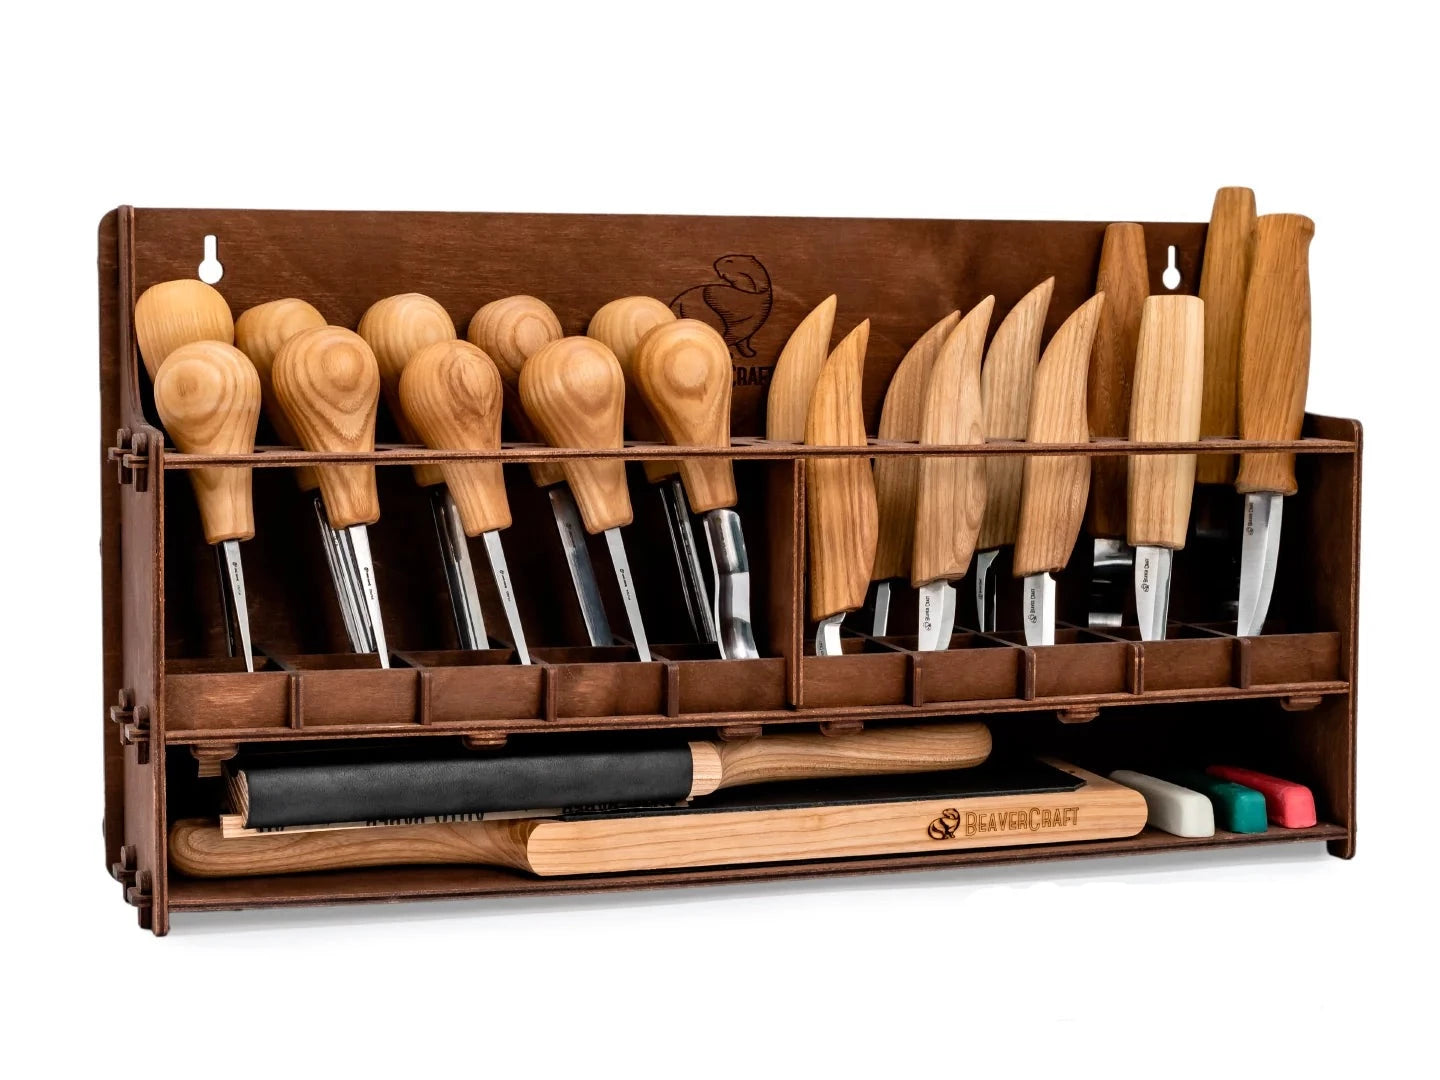 Left-handed Large Wood Carving Tool Set